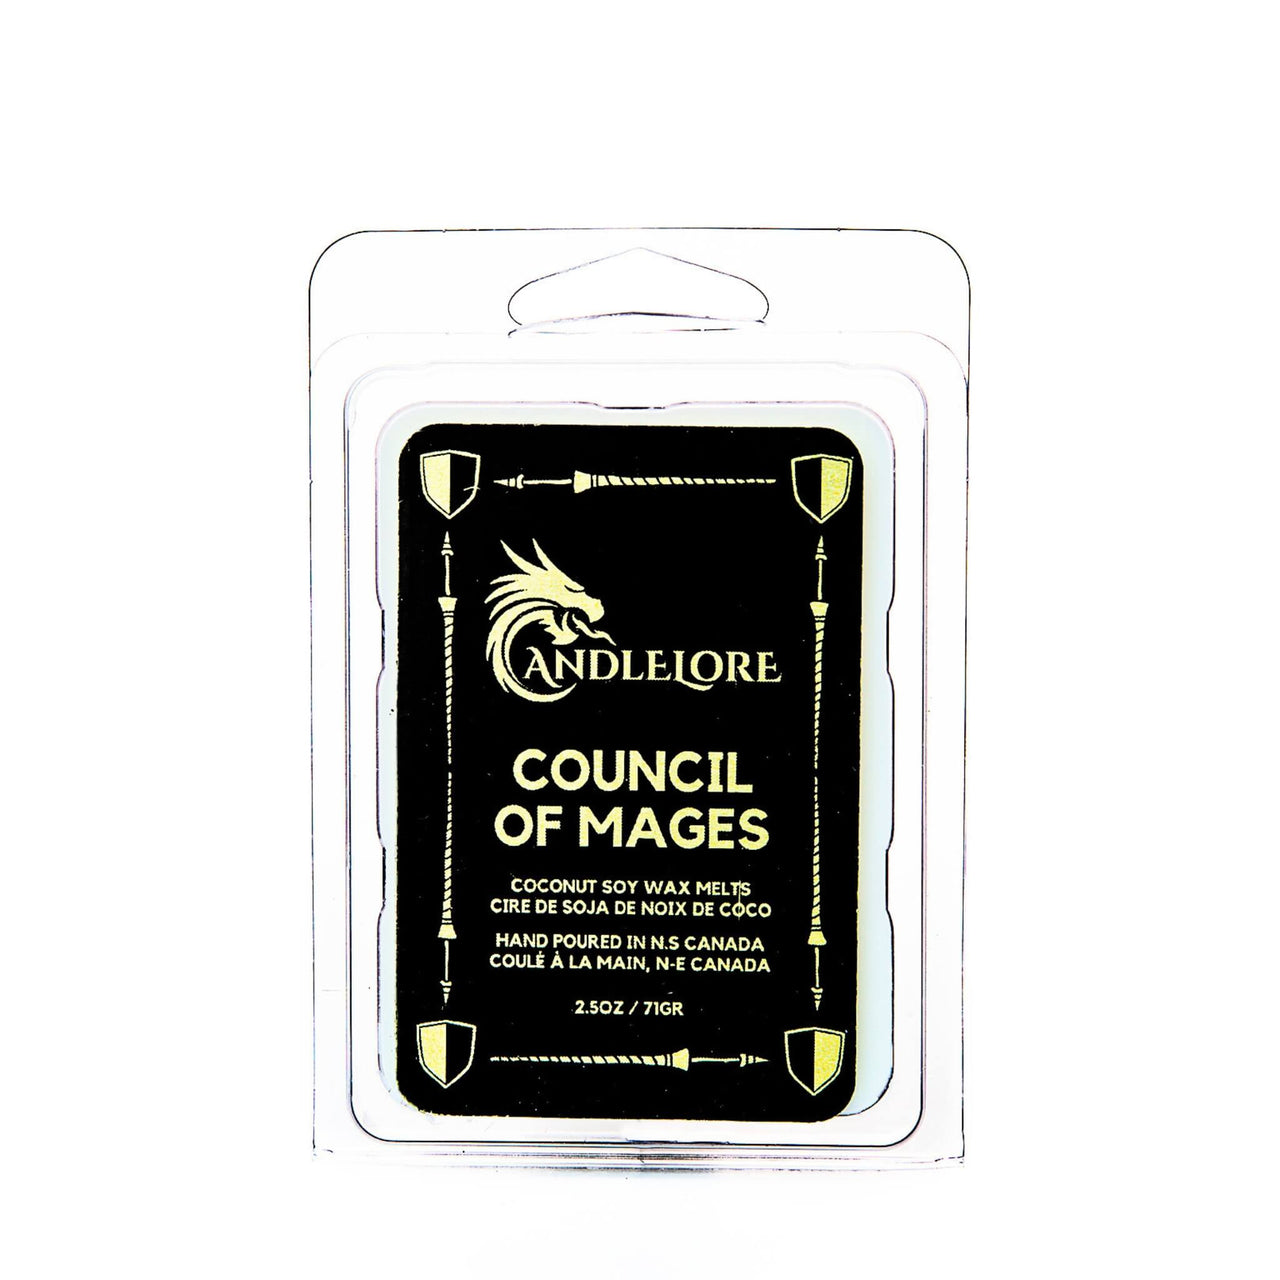 Council of mages wax melts